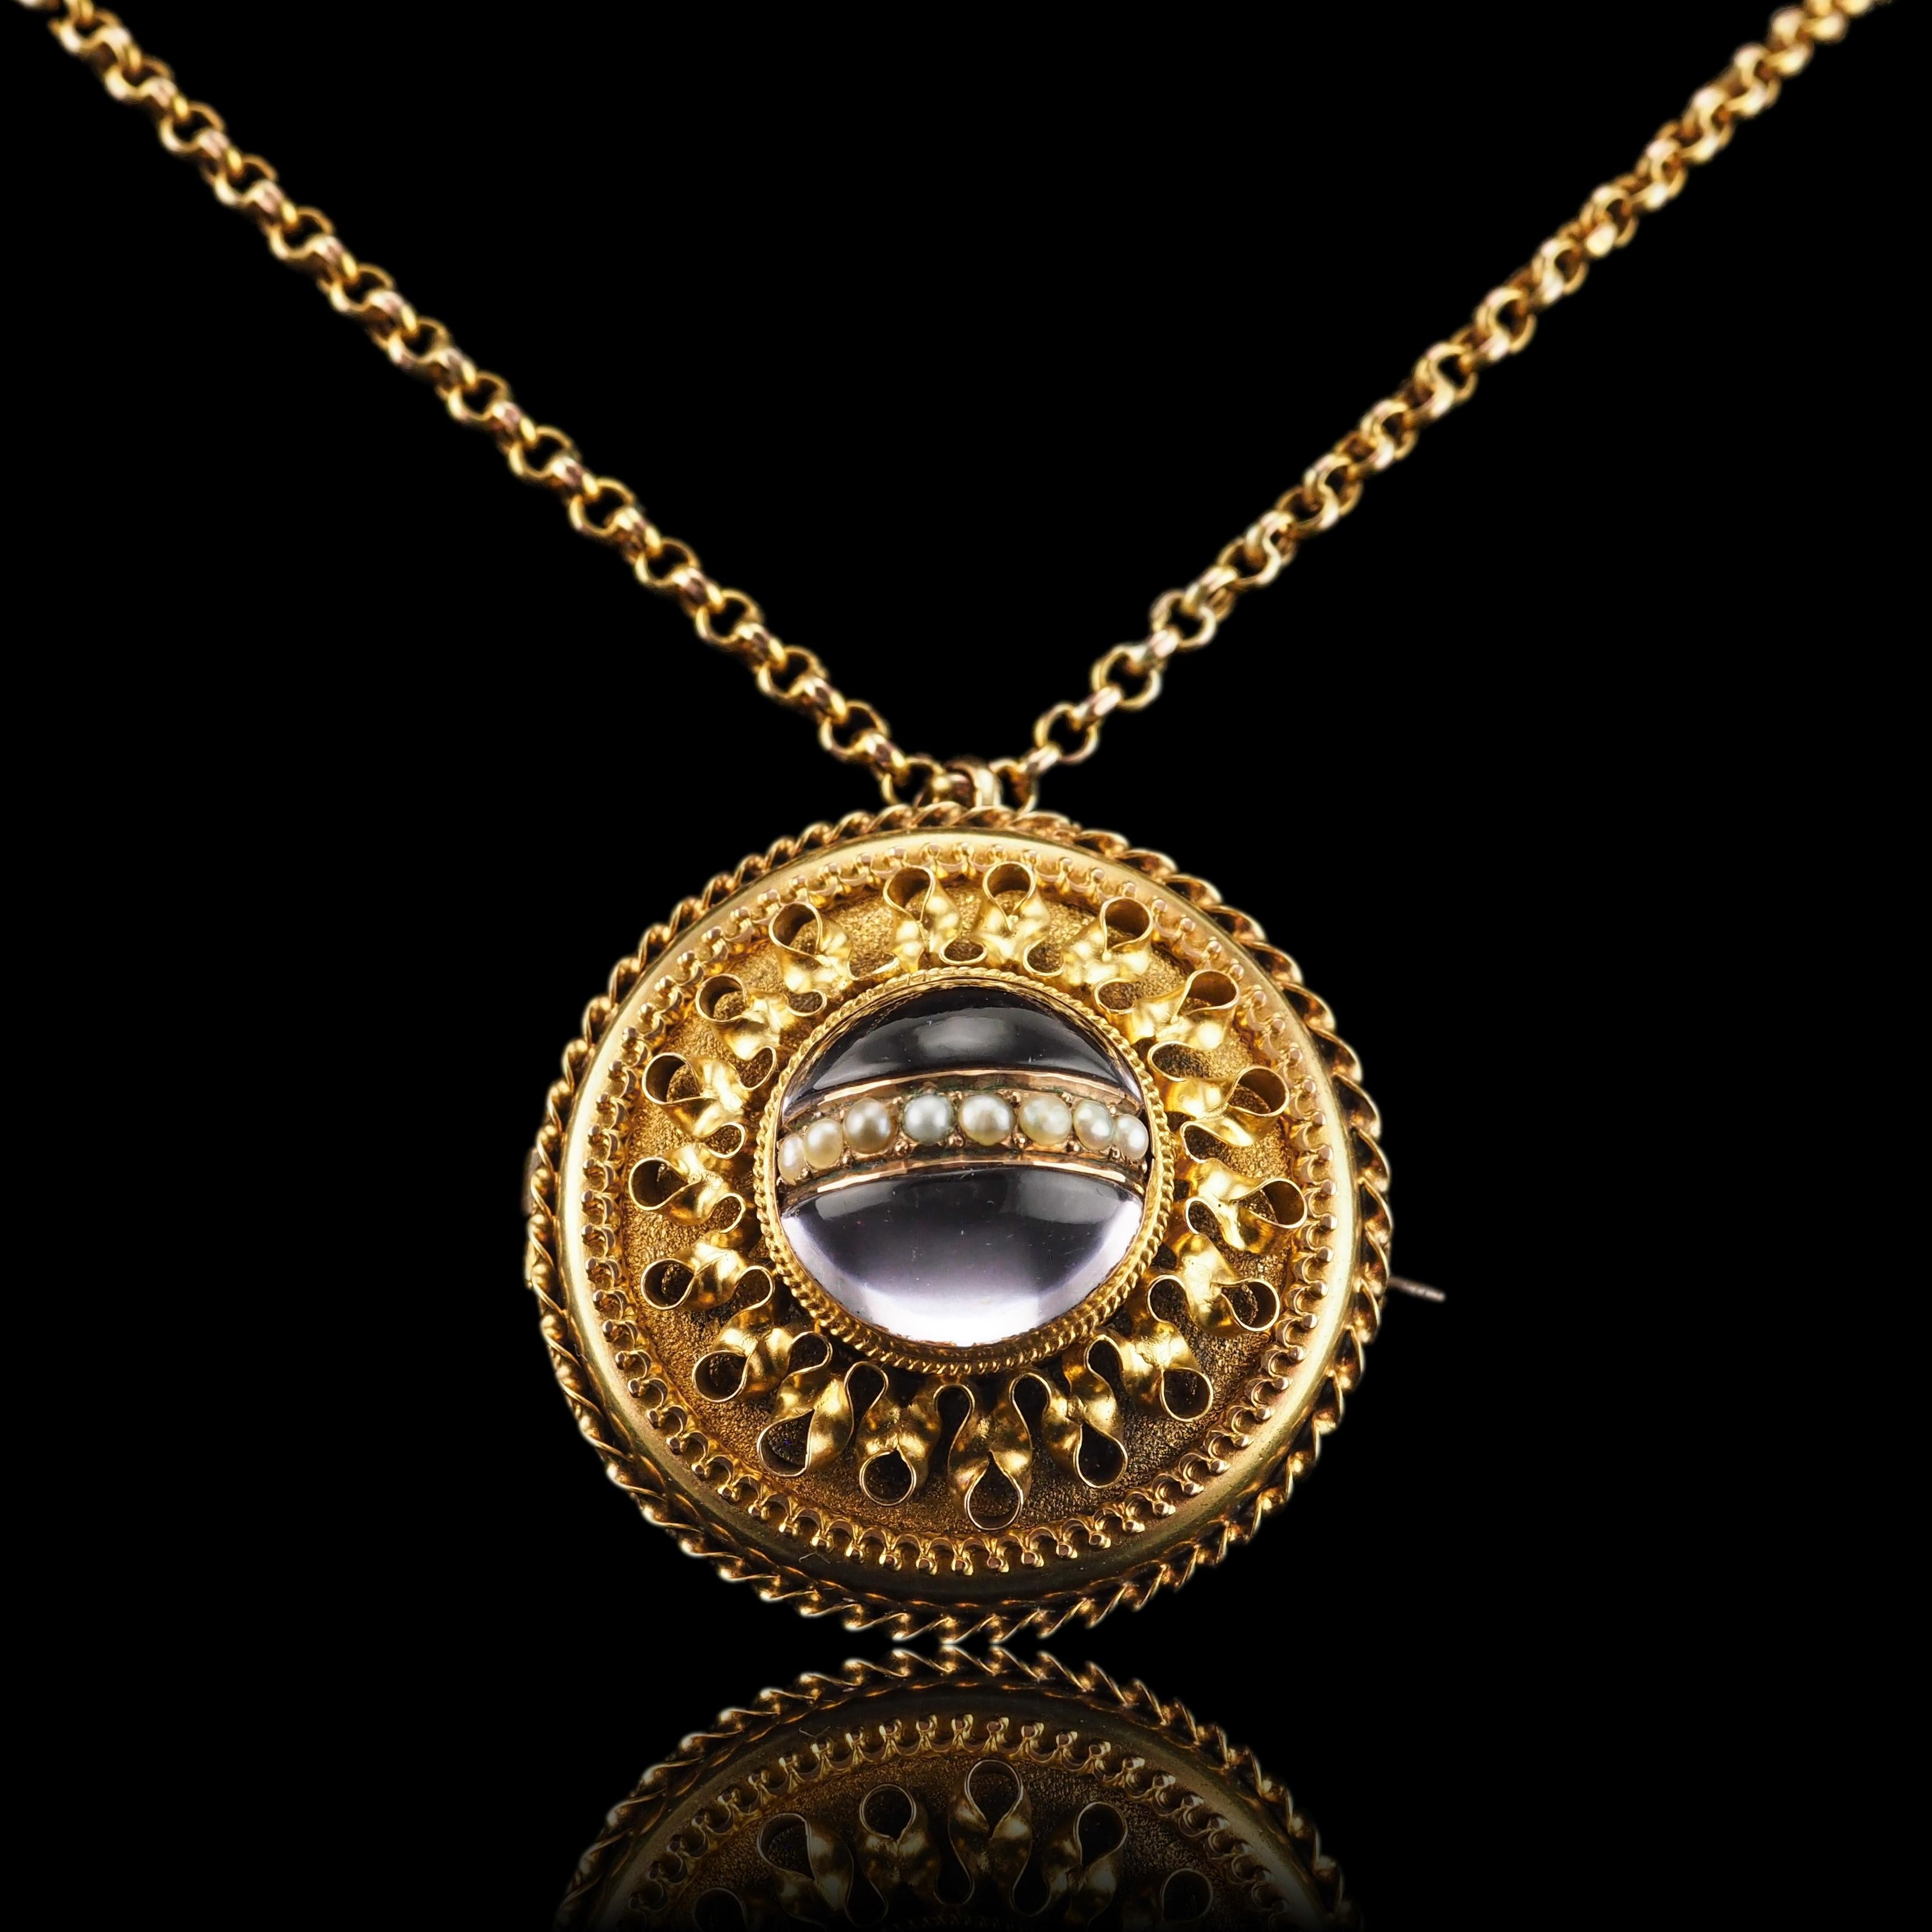 Antique Victorian Etruscan Style Necklace 15K Gold Rock Crystal Pendant c.1870 For Sale 8